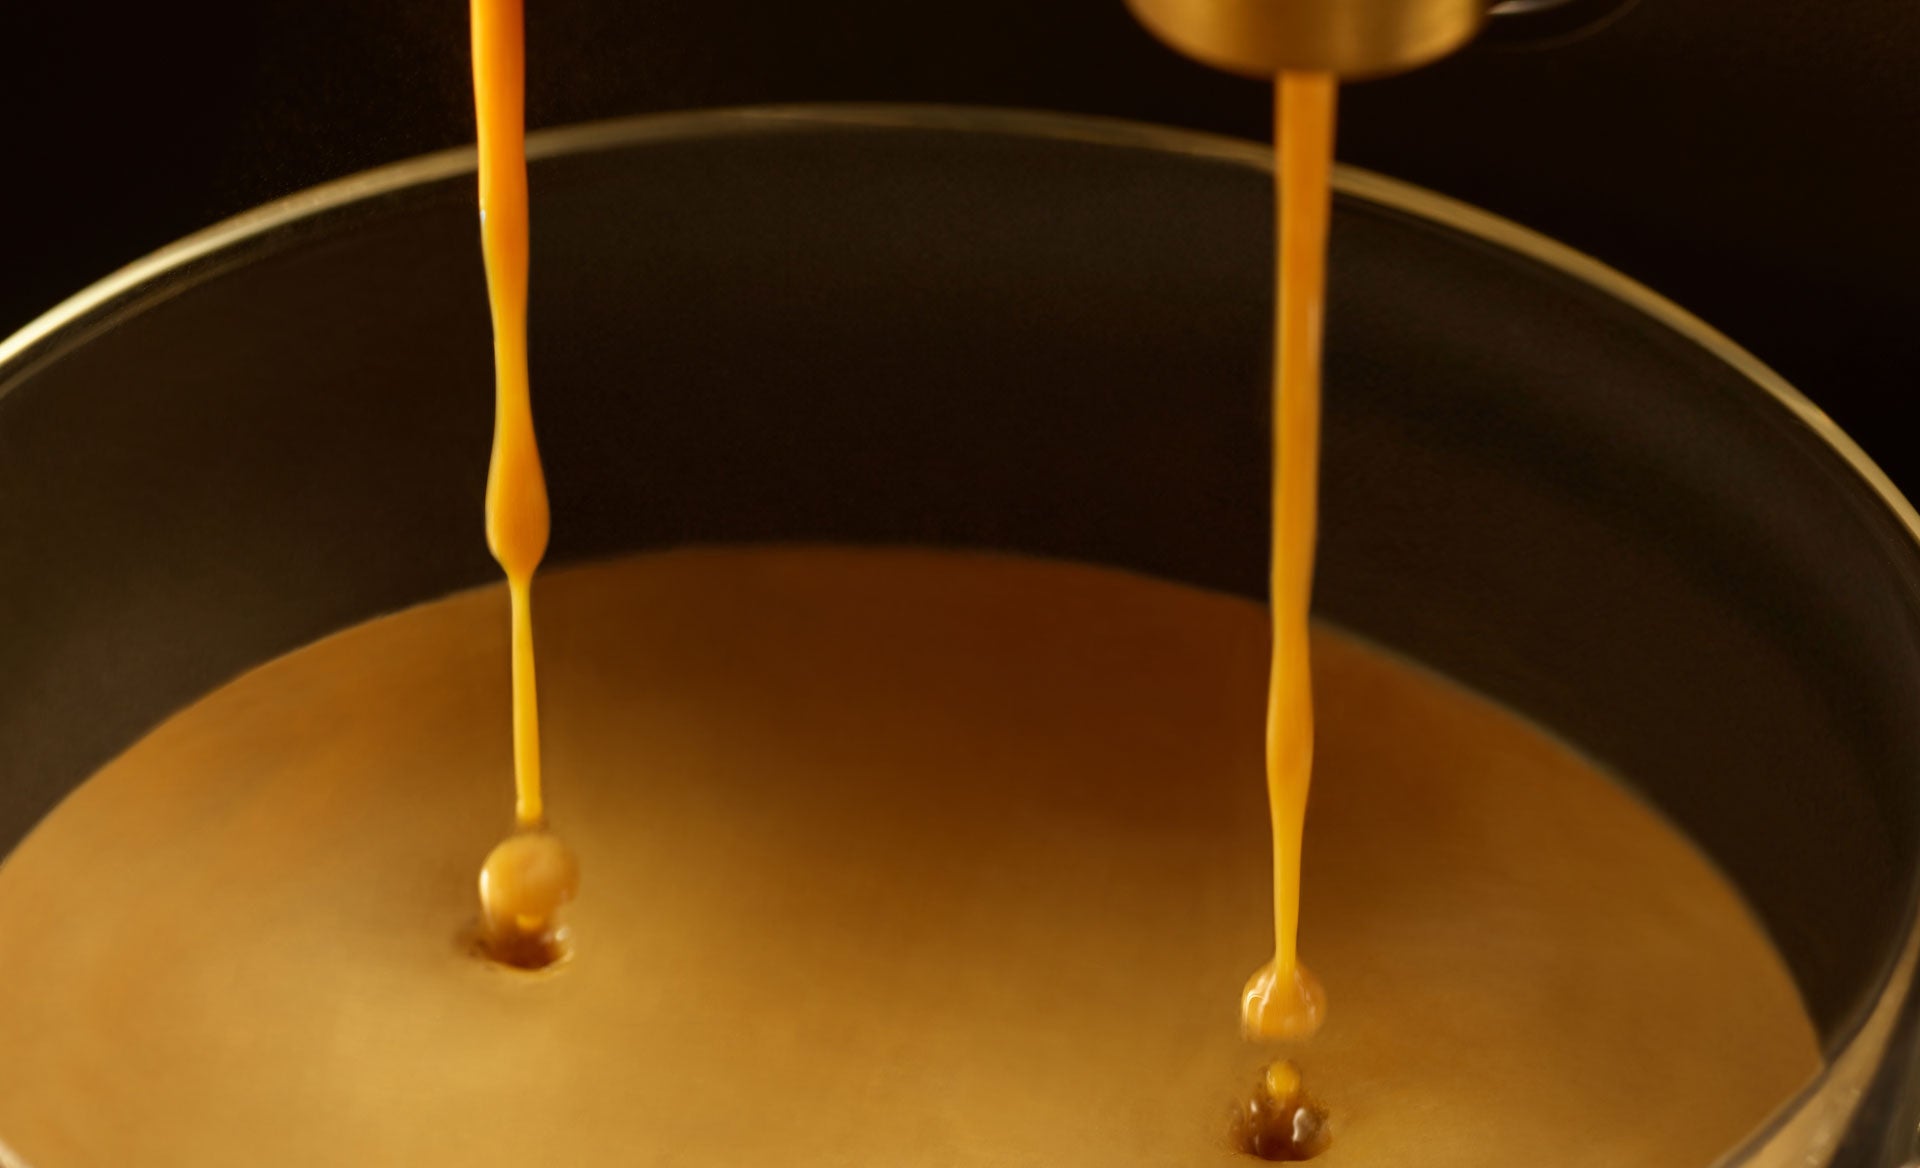 A video showing the rich crema exclusive to L'OR Barista coffee and espresso.